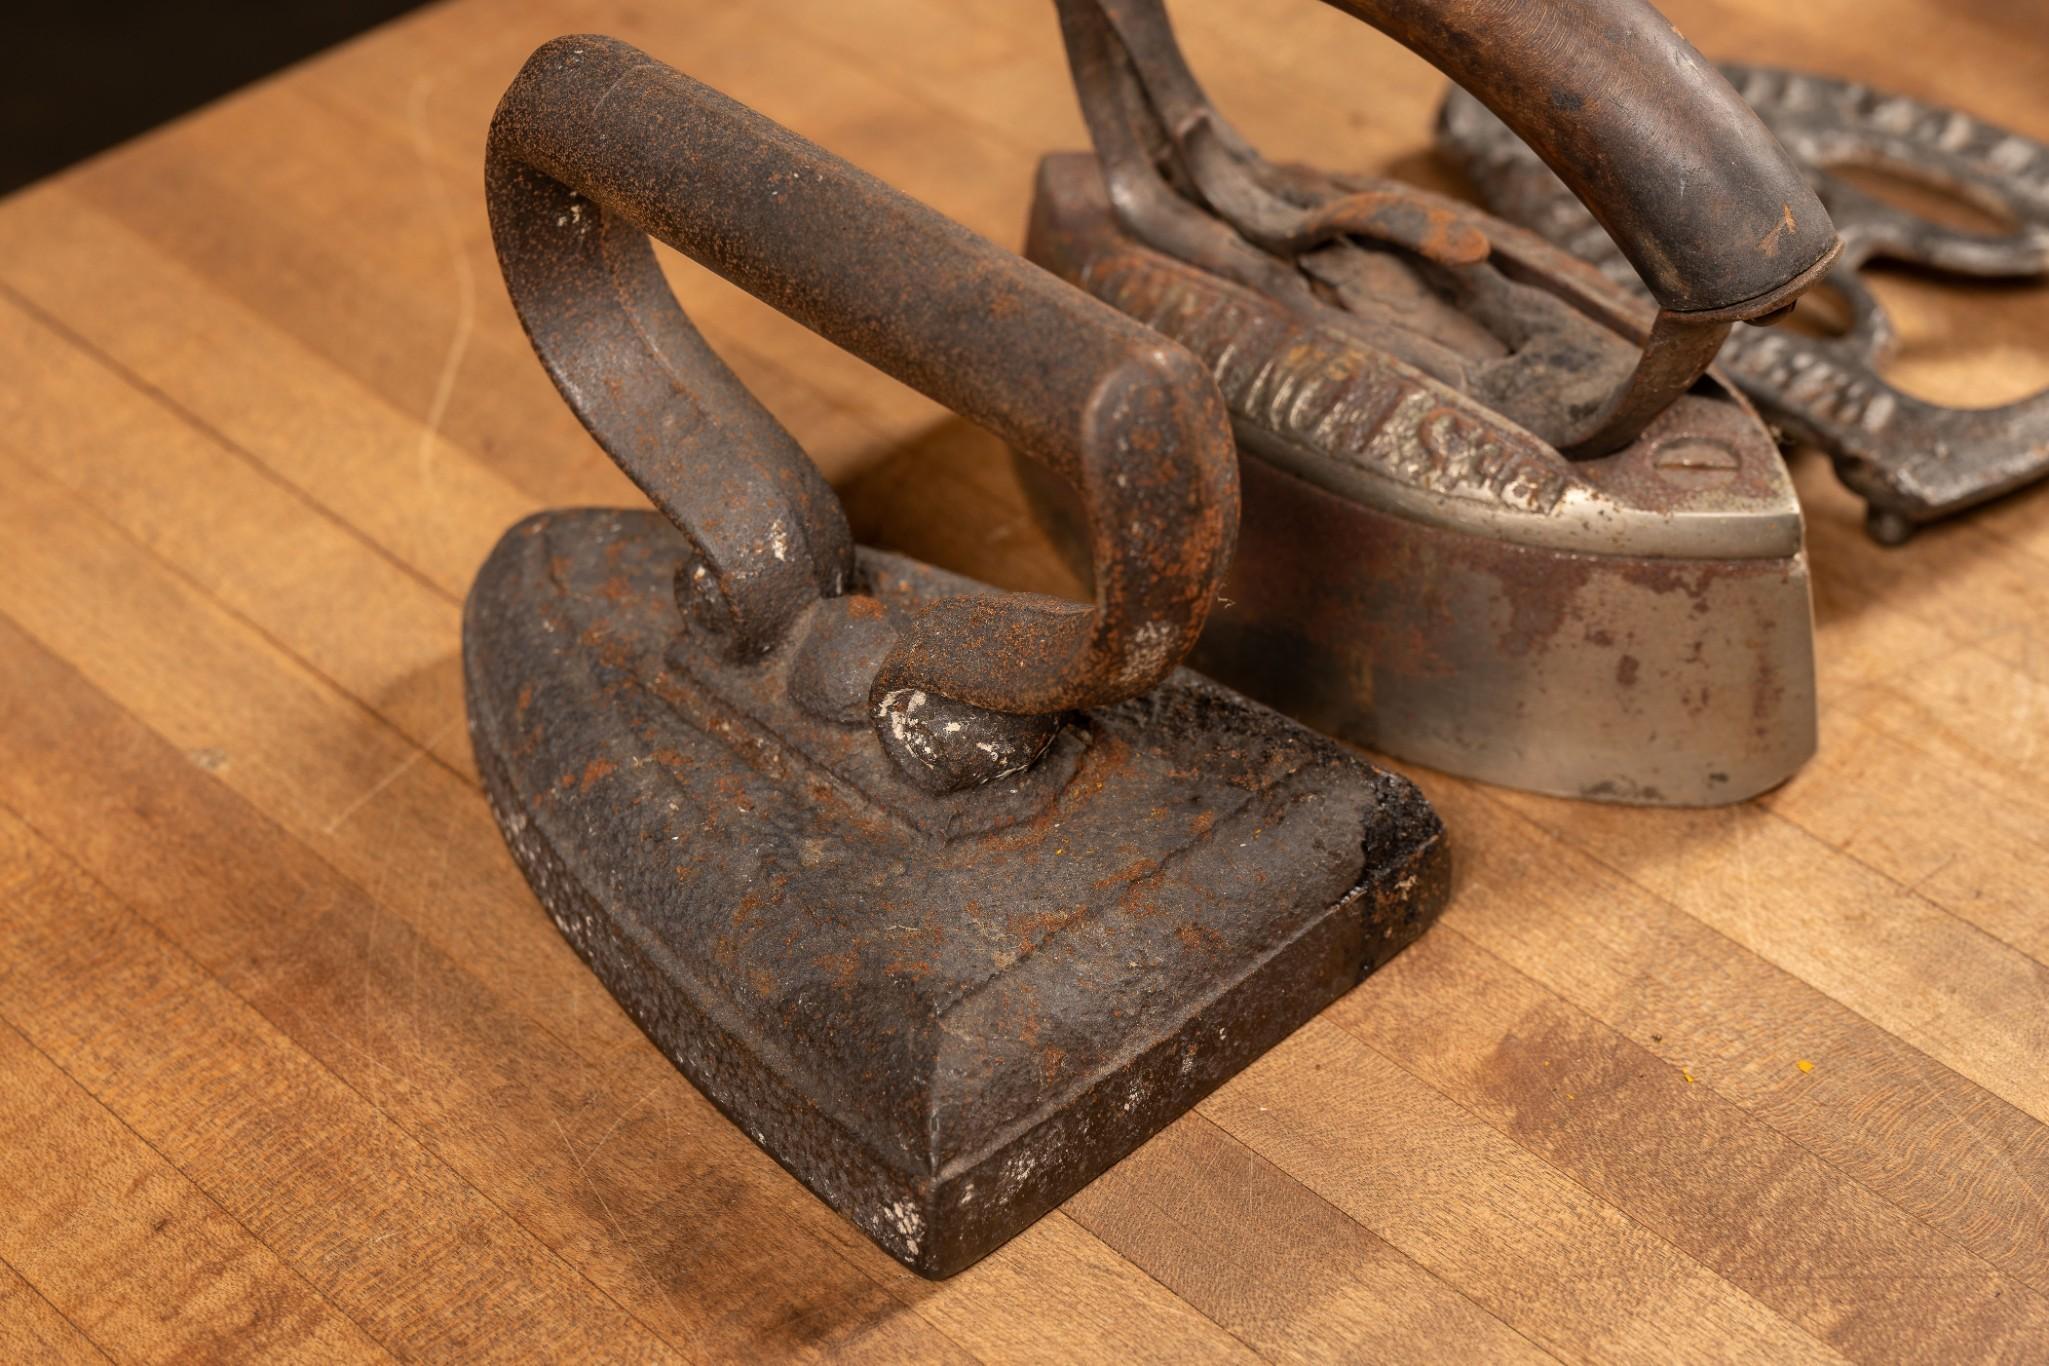 Three Antique Clothes Irons and Trivet